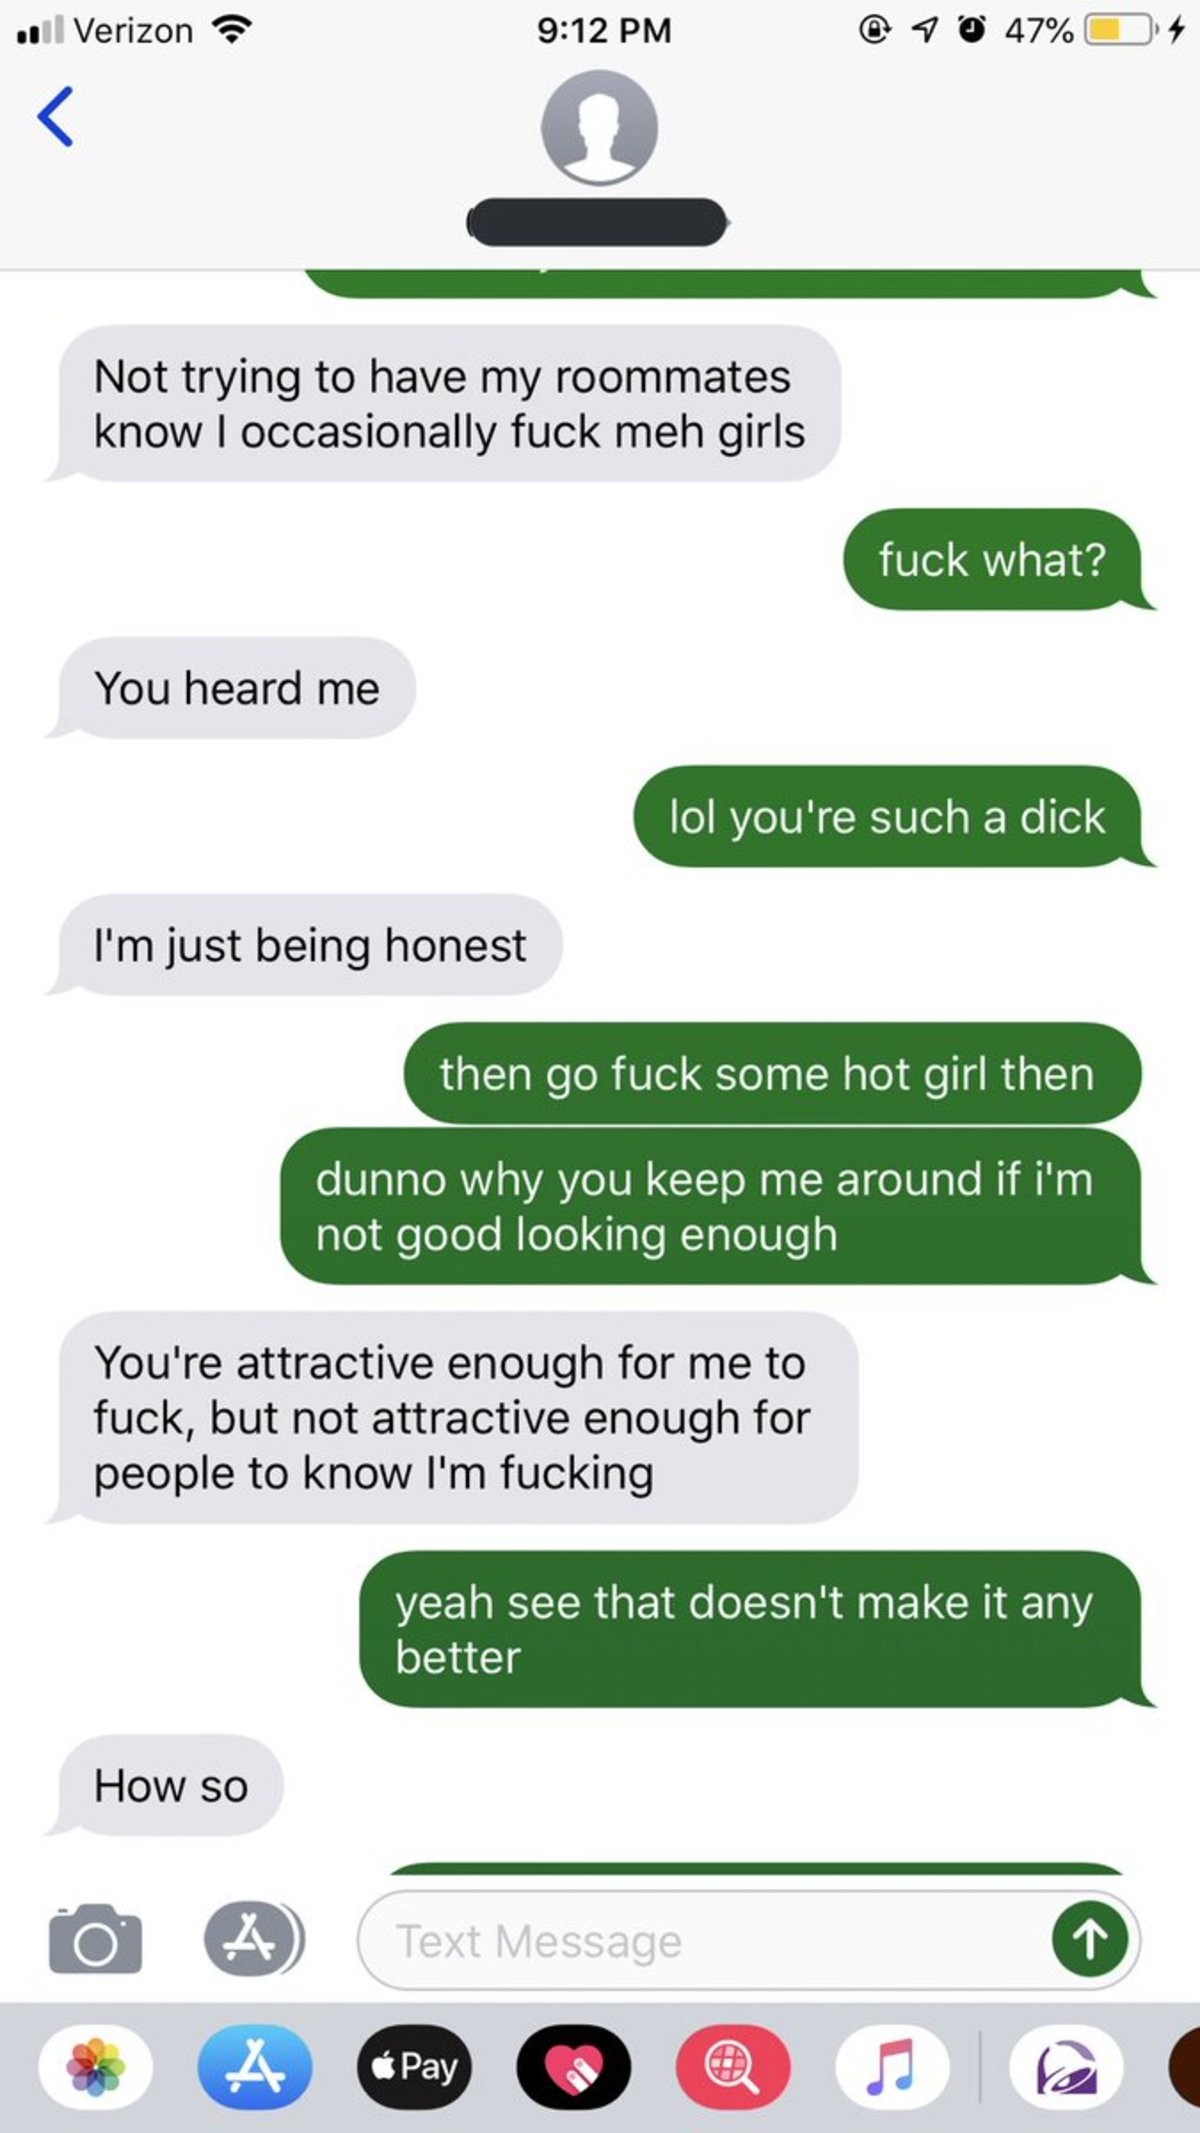 how based is he. .. Jesus, what a bunch of hypocrites. If this were on the other end, a girl saying, &quot;You're attractive enough to , but not to show around my friends&quot; you